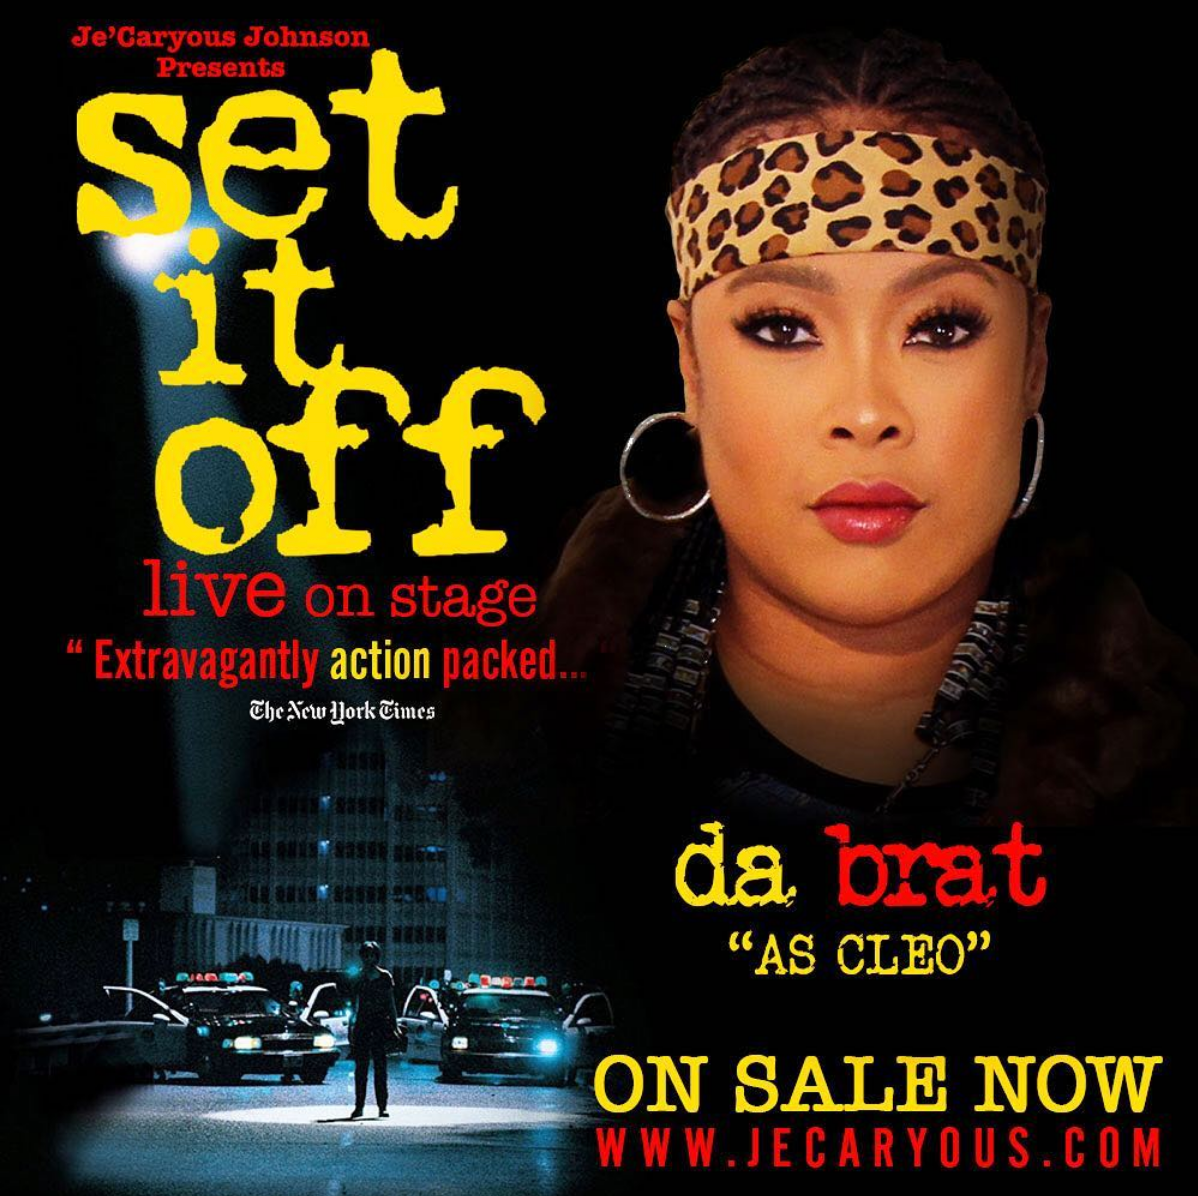 The Quick Read: Da Brat Is Bringing 'Set It Off' To The Stage
